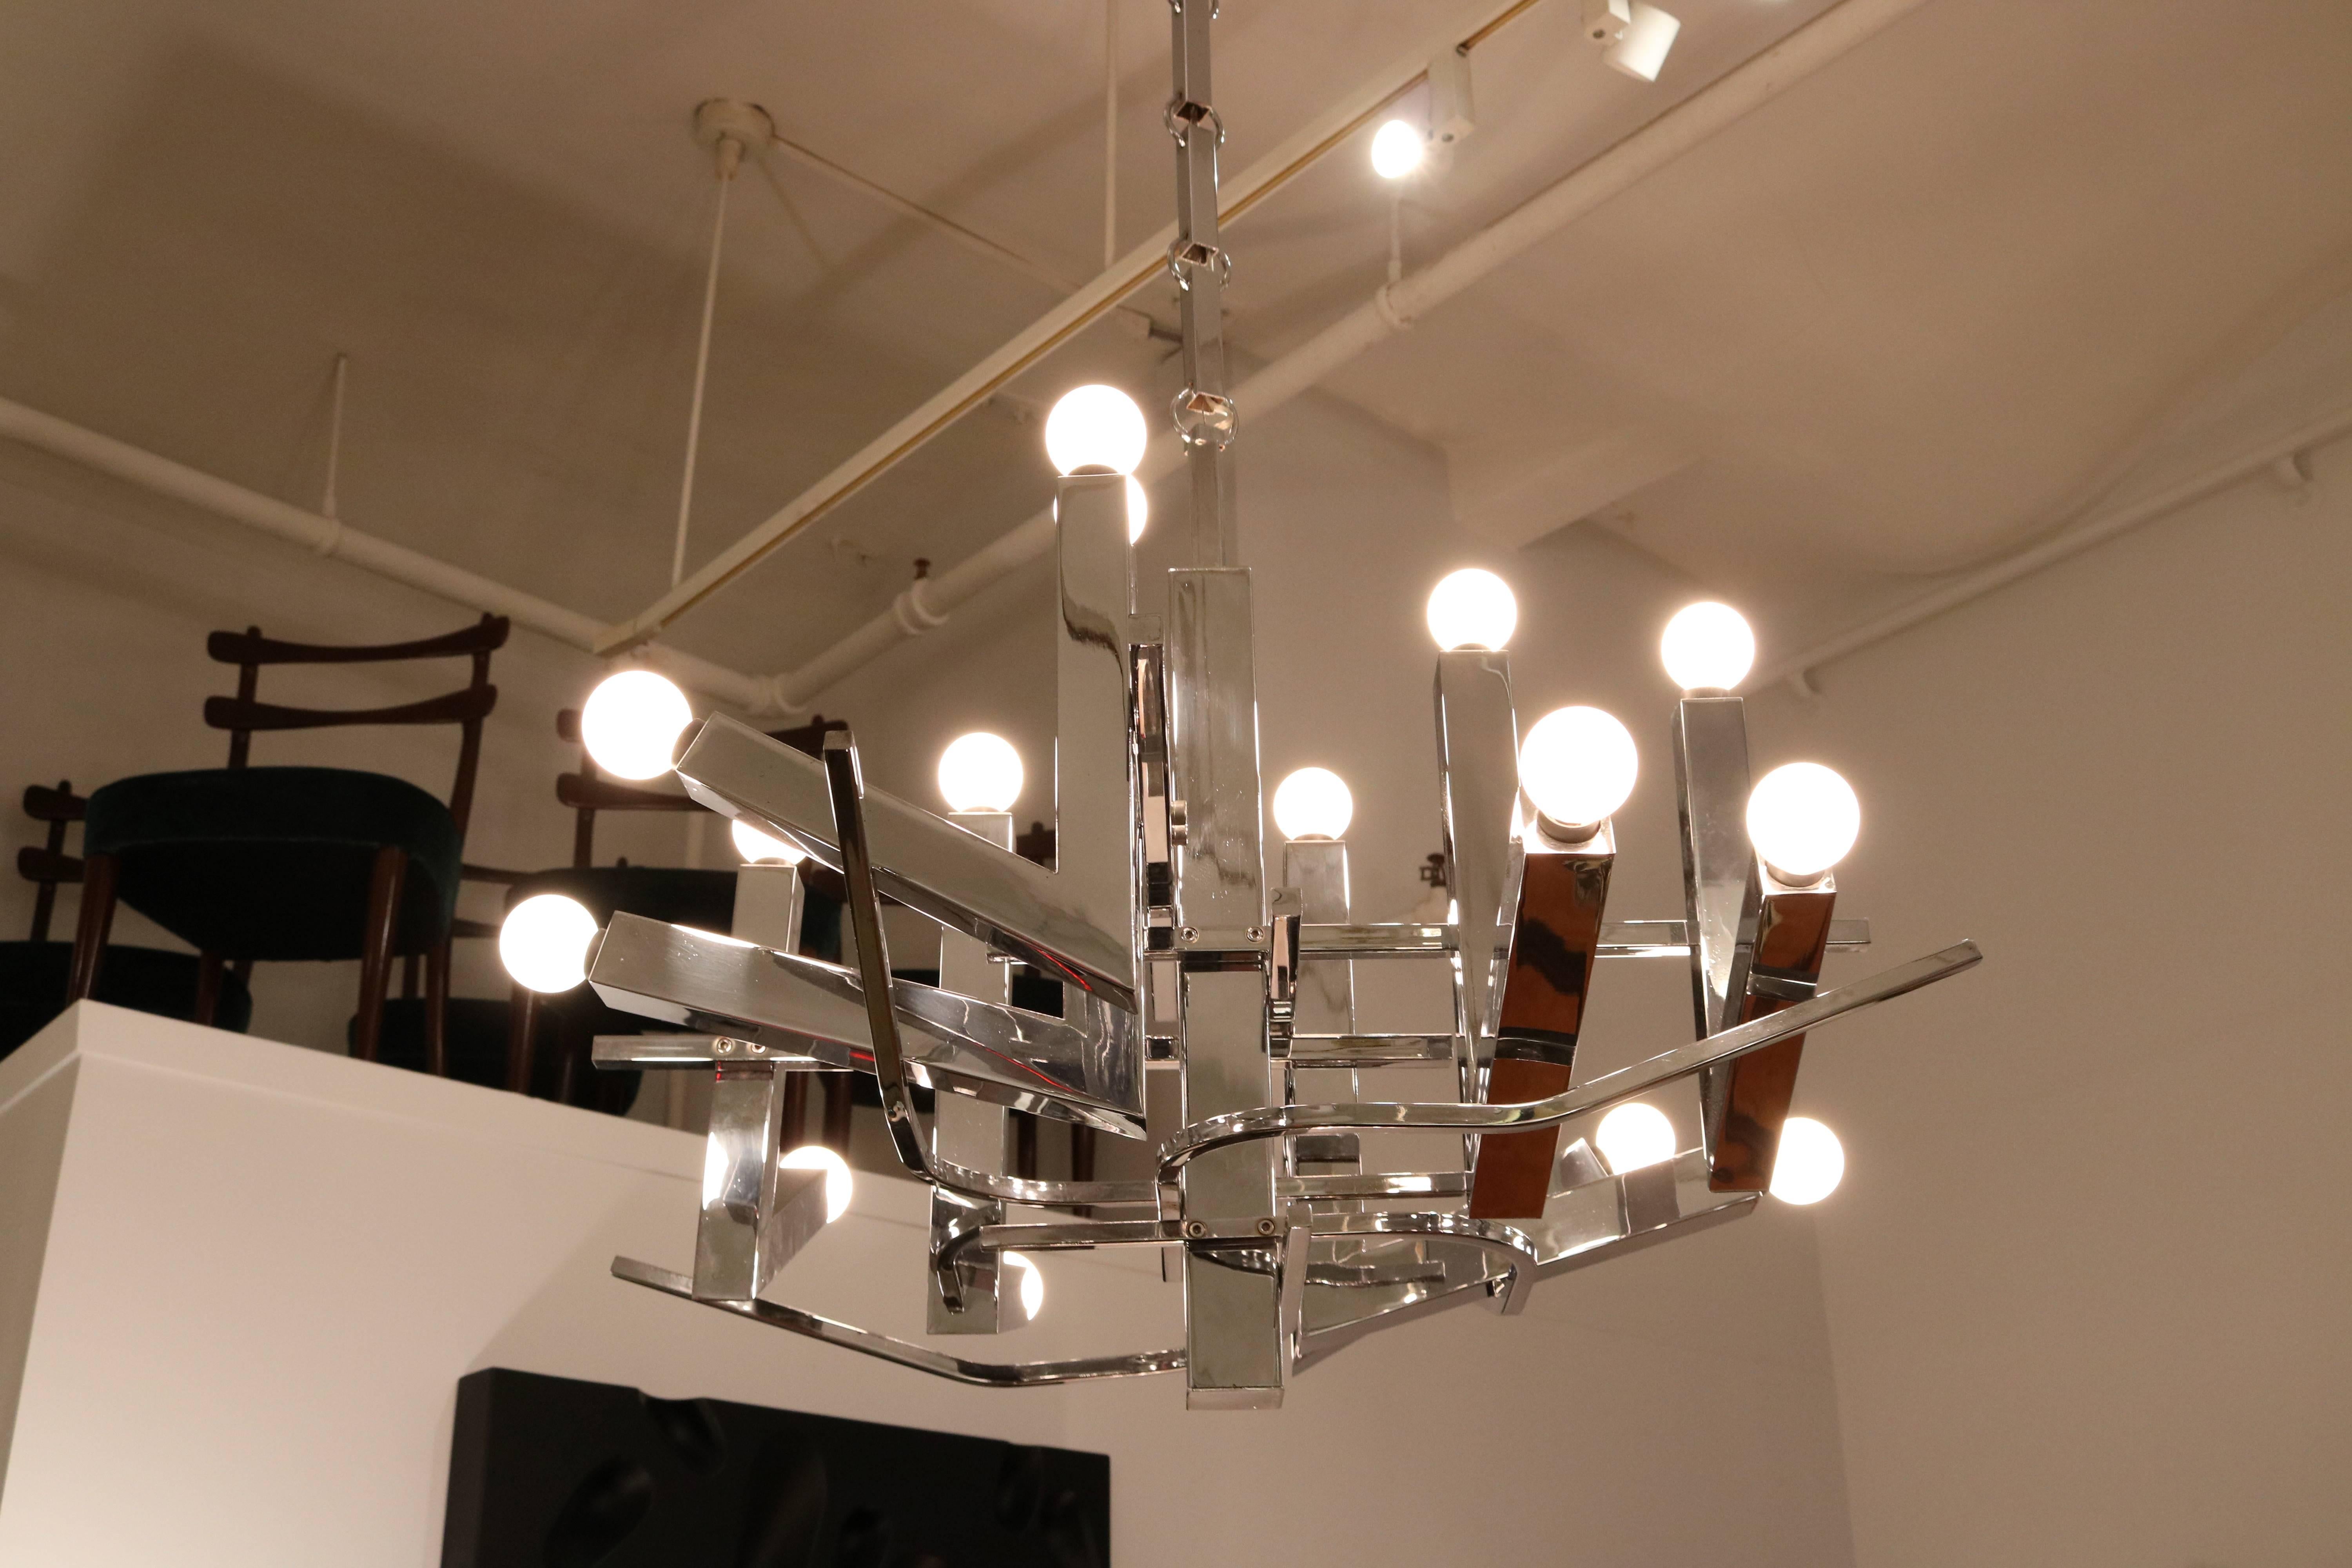 Sculptural Italian Modernist sixteen light chandelier.
Chromed metal finish with sixteen candelabra base sockets.
Features original chain with a length over five feet long.
THIS FIXTURE IS NOT UL WIRED.